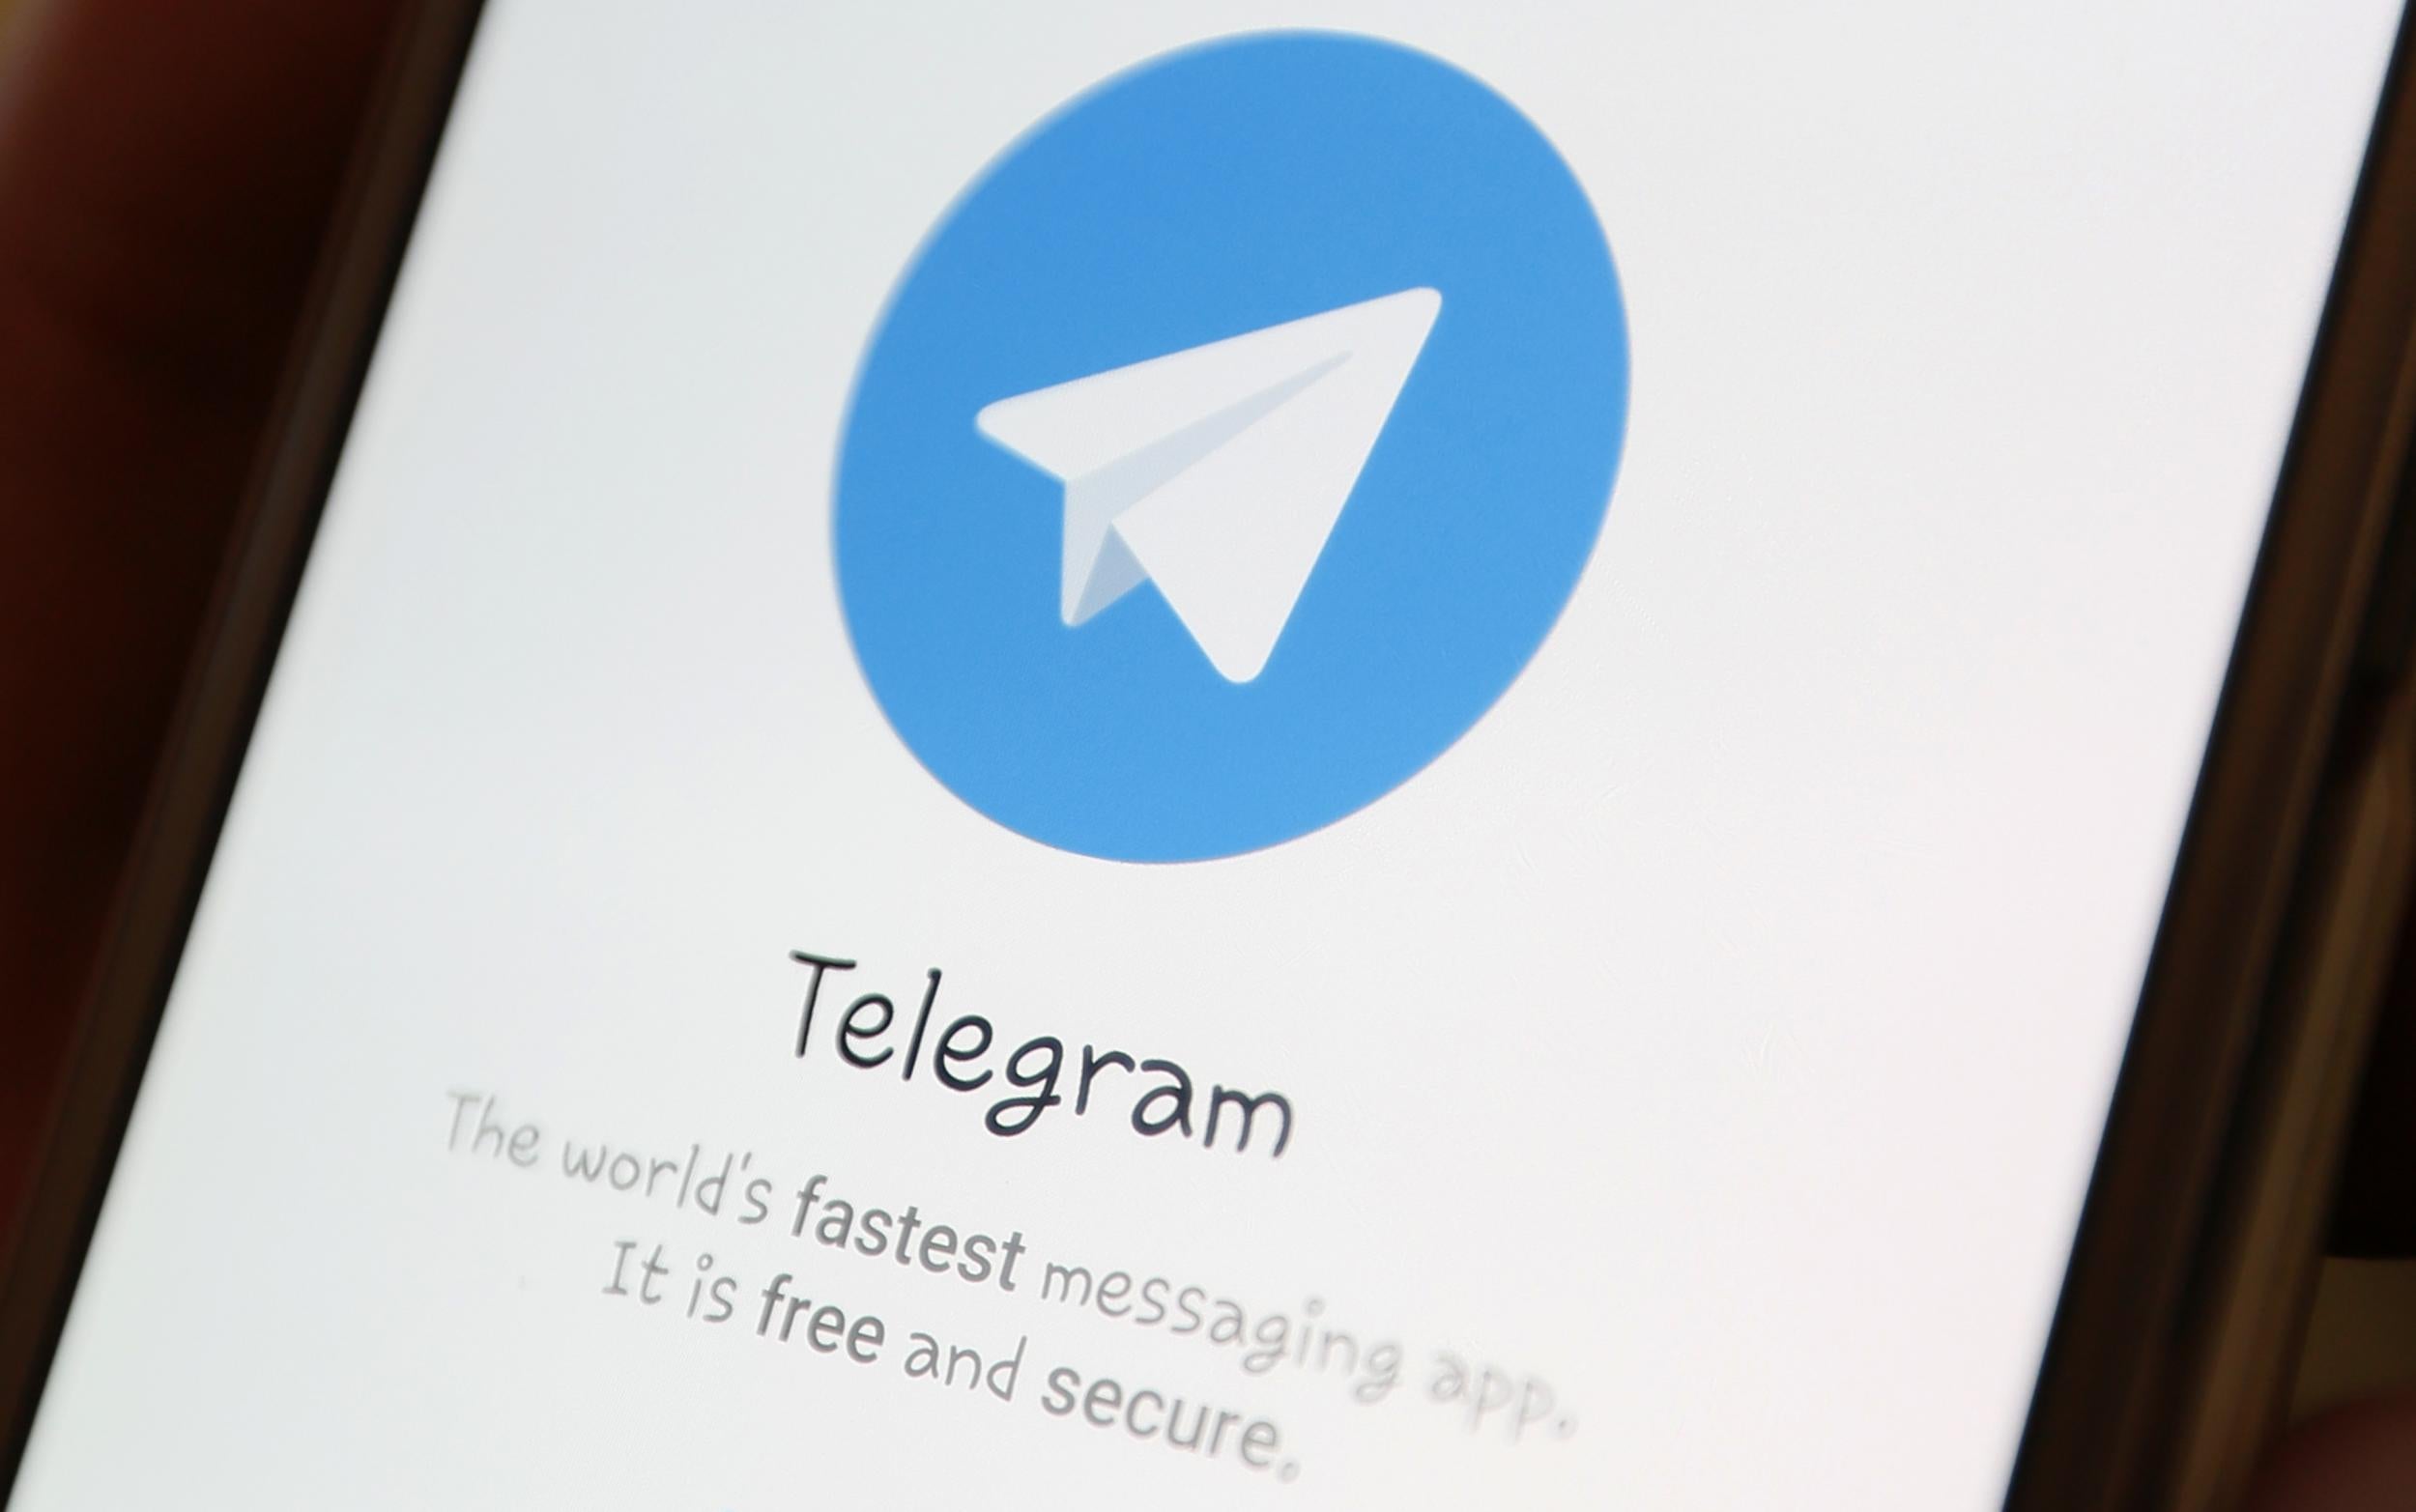 The popular messaging app Telegram wants to make cryptocurrency more mainstream by launching its own virtual currency for its 200 million users